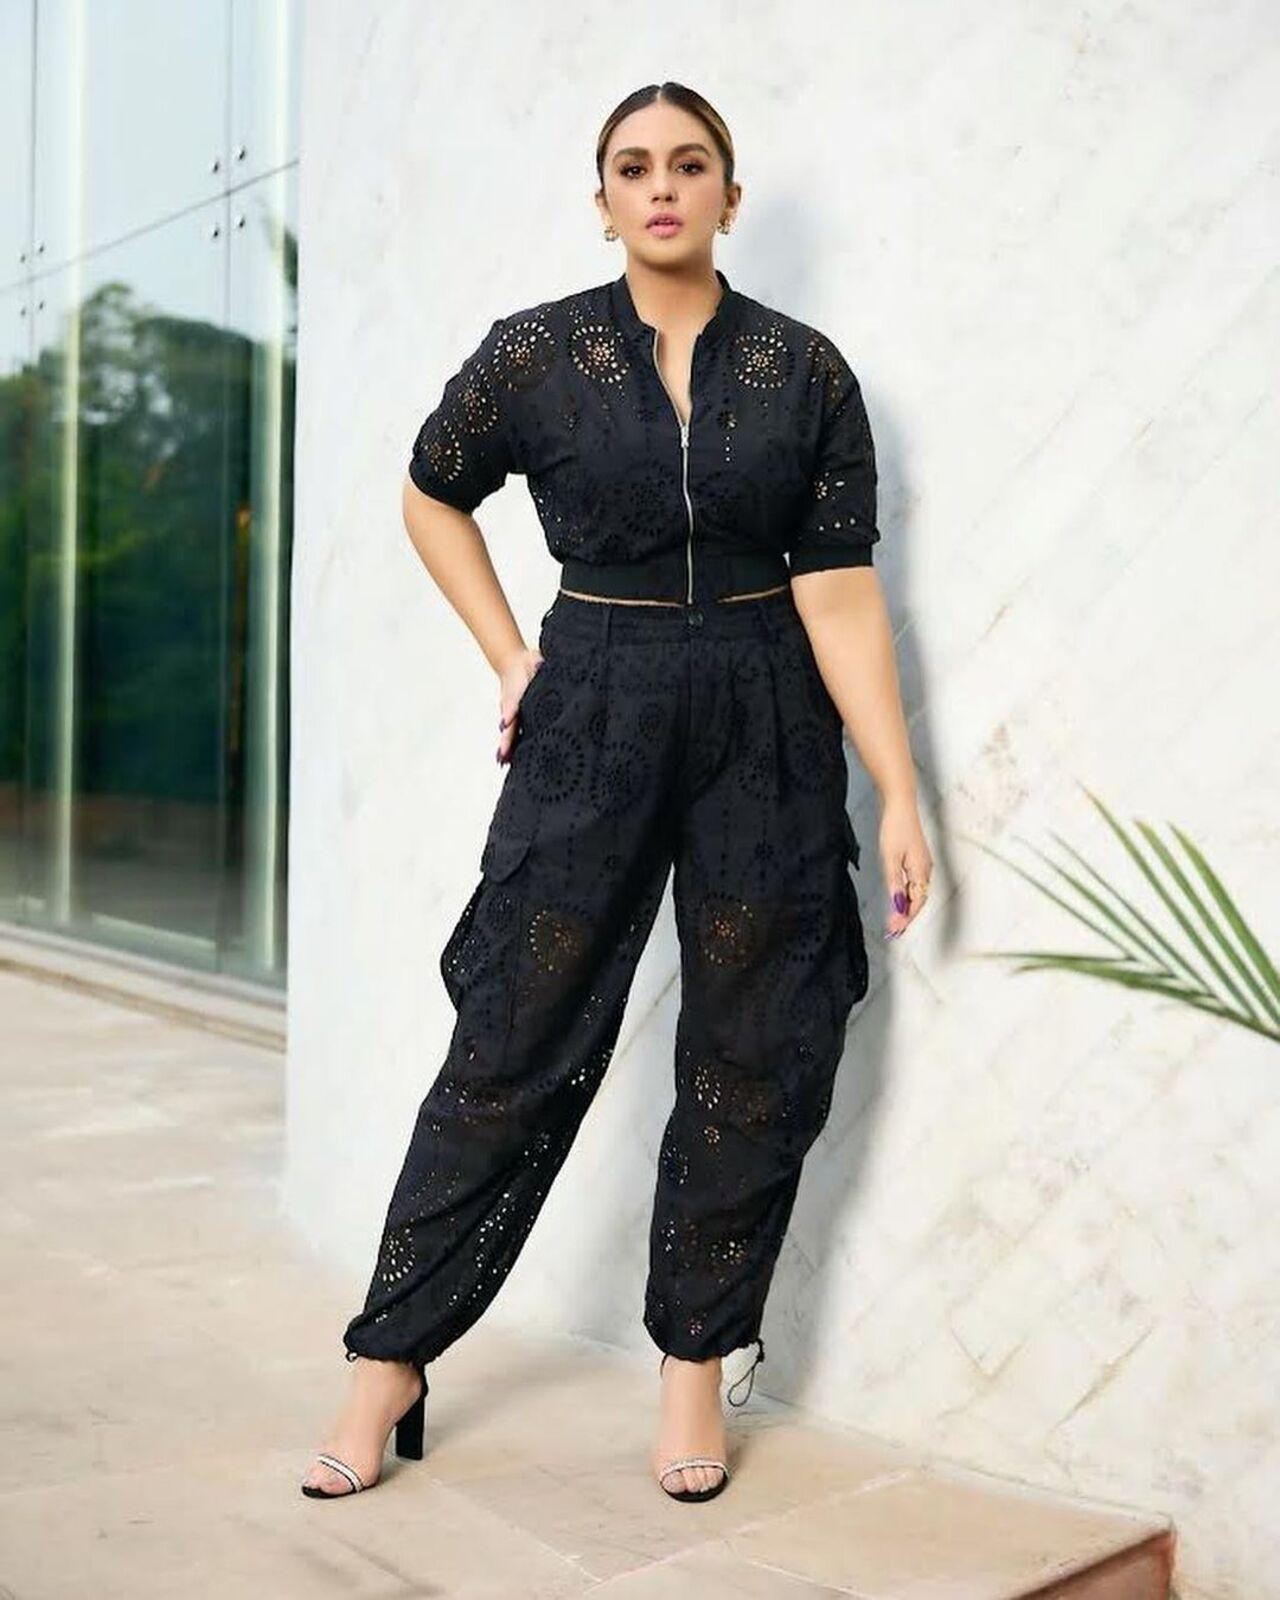 The choice of smart studs added a touch of glamour to her ensemble. Huma Qureshi's impeccable fashion sense undoubtedly captured hearts, making her a true fashion icon